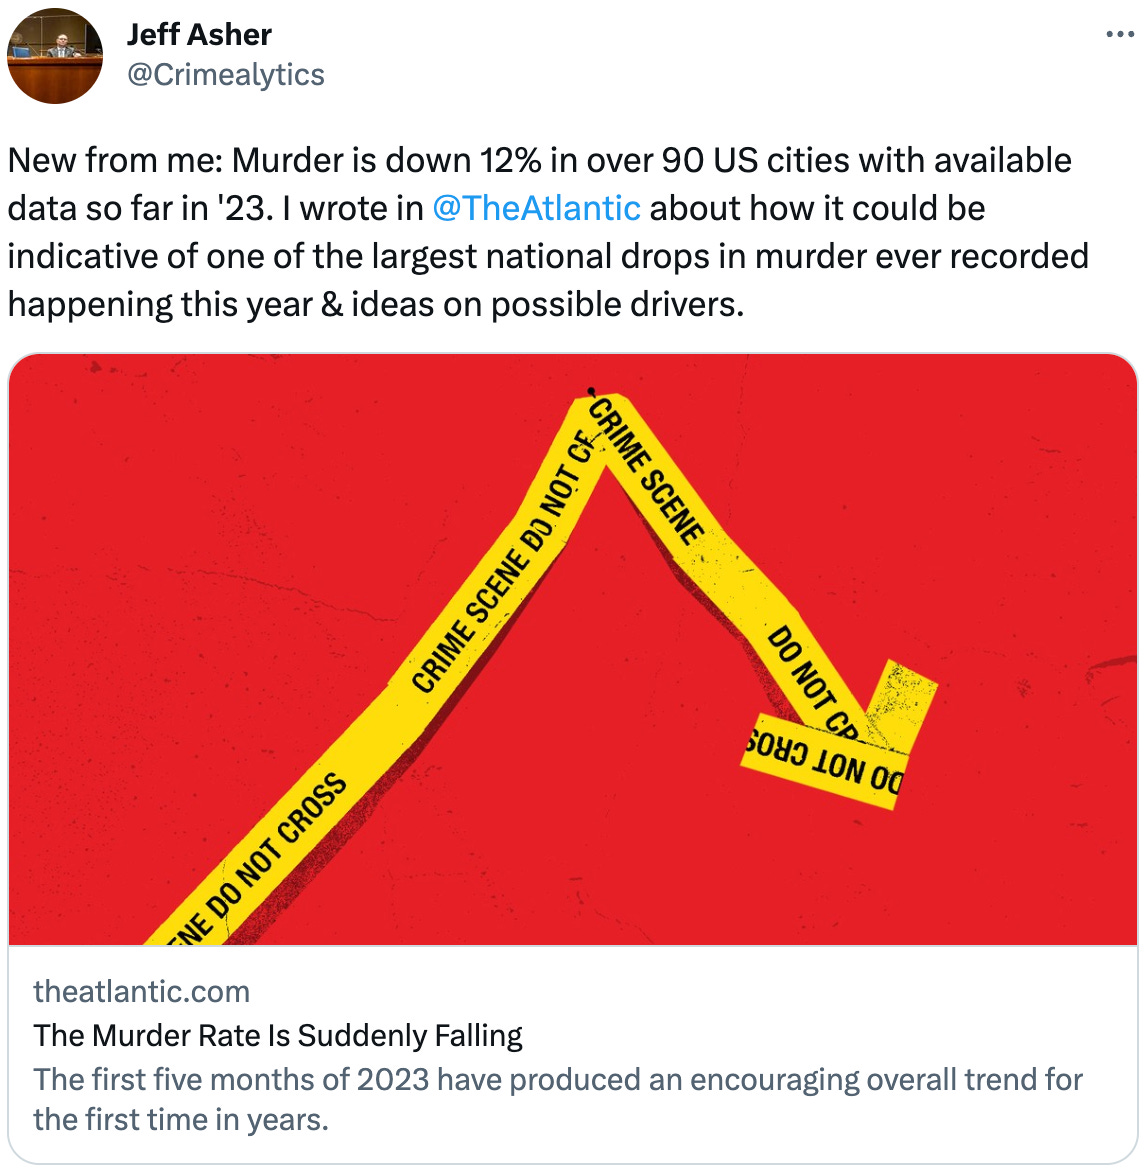  Jeff Asher @Crimealytics New from me: Murder is down 12% in over 90 US cities with available data so far in '23. I wrote in  @TheAtlantic  about how it could be indicative of one of the largest national drops in murder ever recorded happening this year & ideas on possible drivers. theatlantic.com The Murder Rate Is Suddenly Falling The first five months of 2023 have produced an encouraging overall trend for the first time in years.